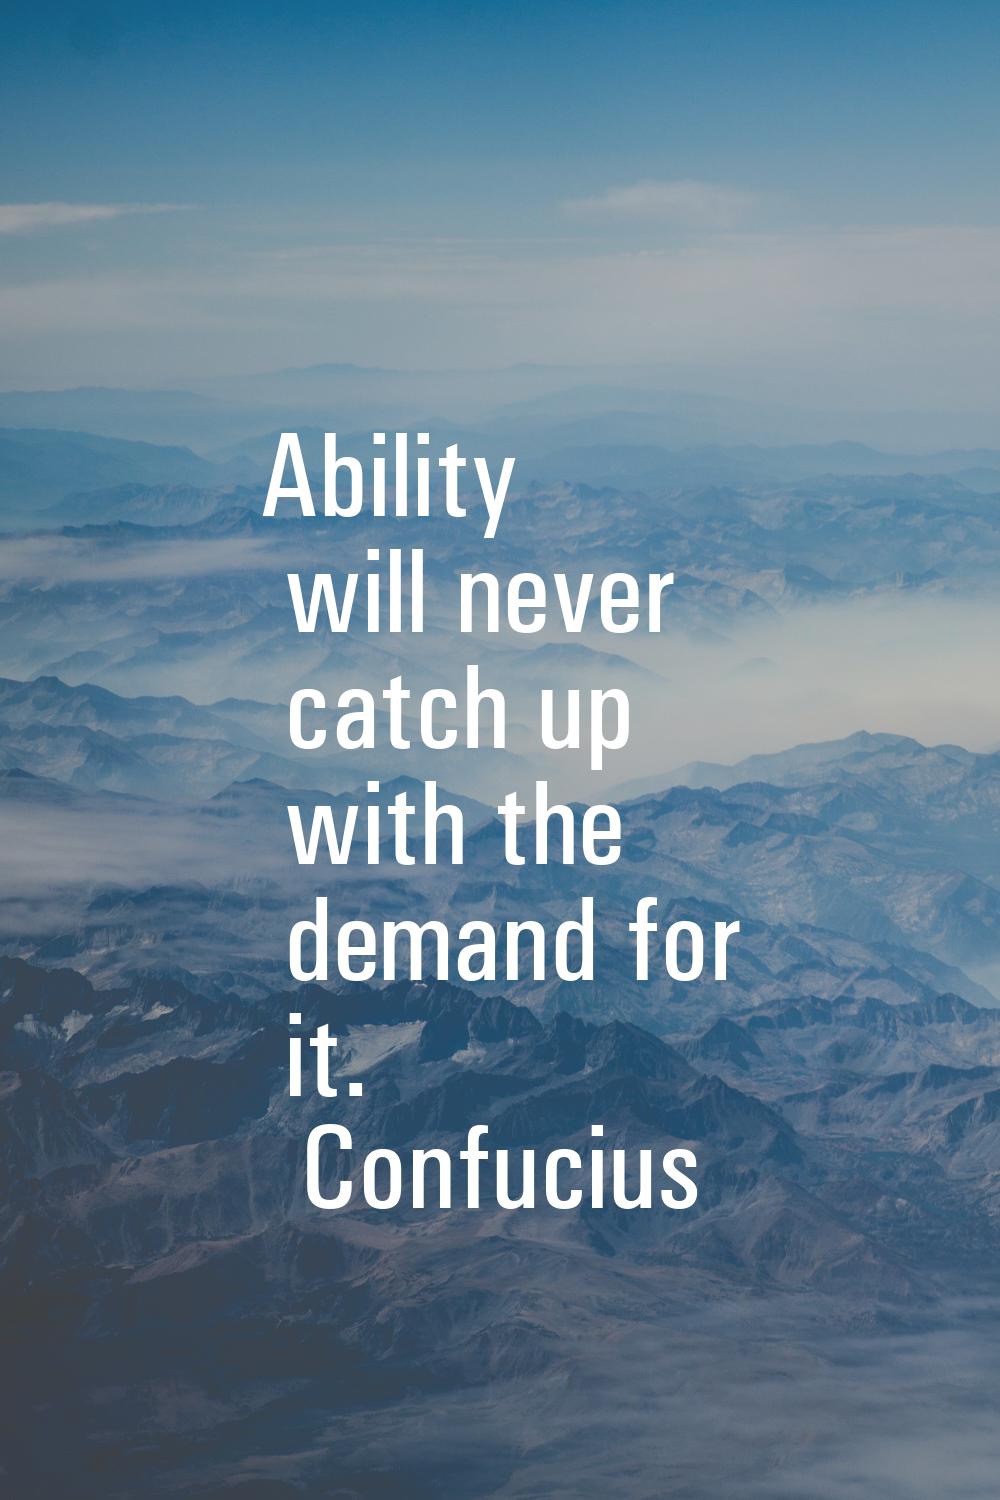 Ability will never catch up with the demand for it.